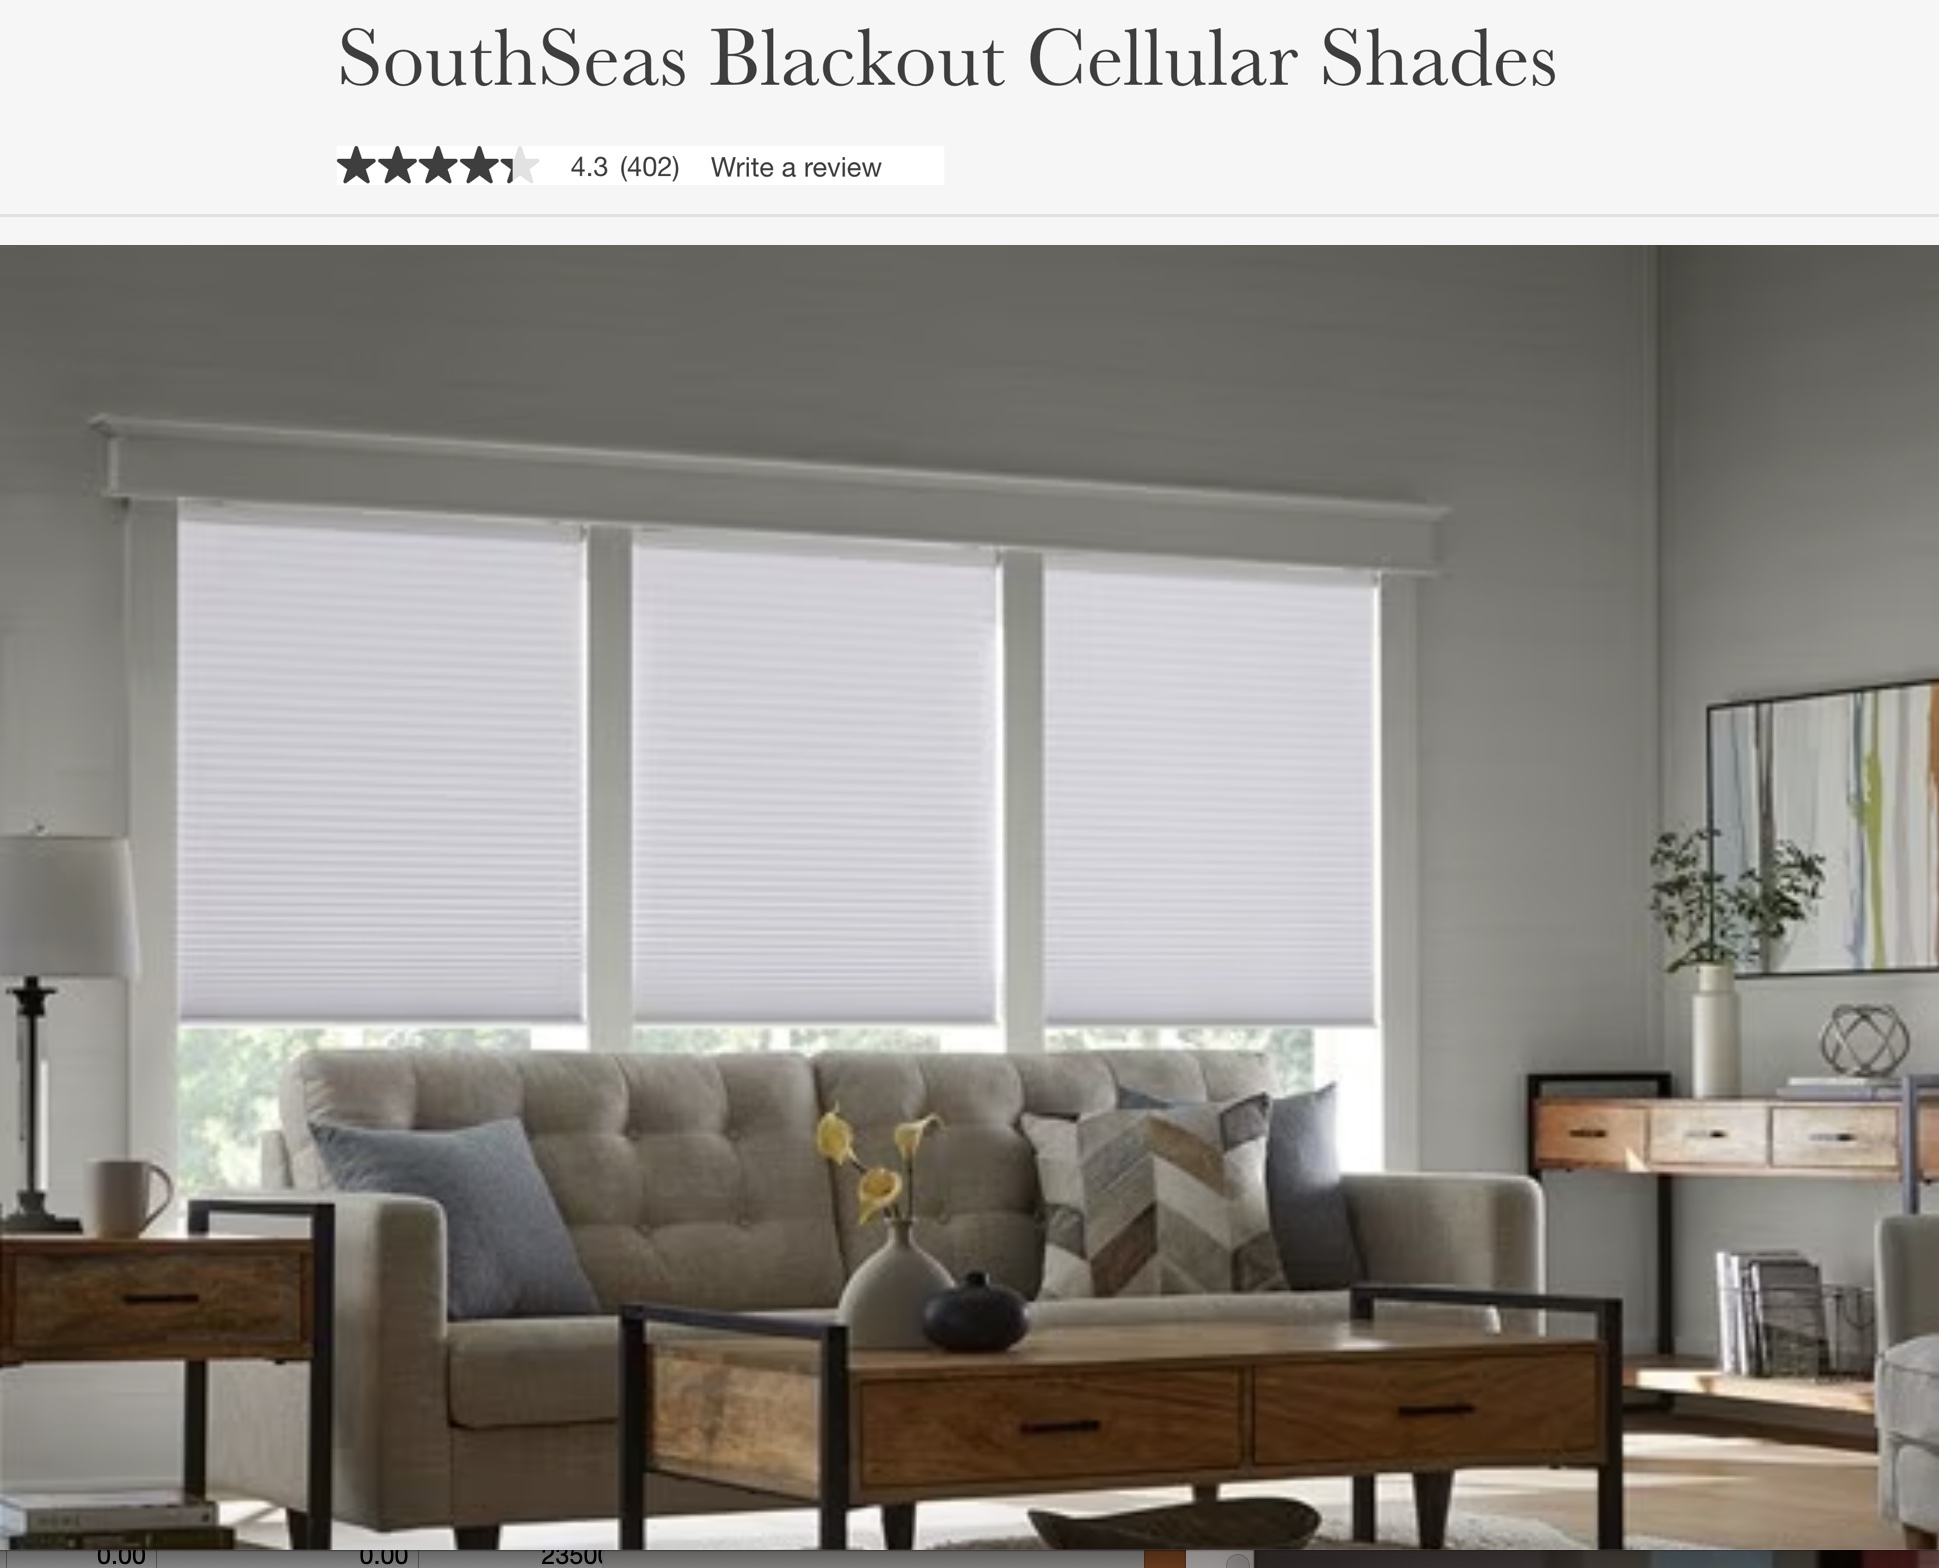  blackout cellular shades american blinds